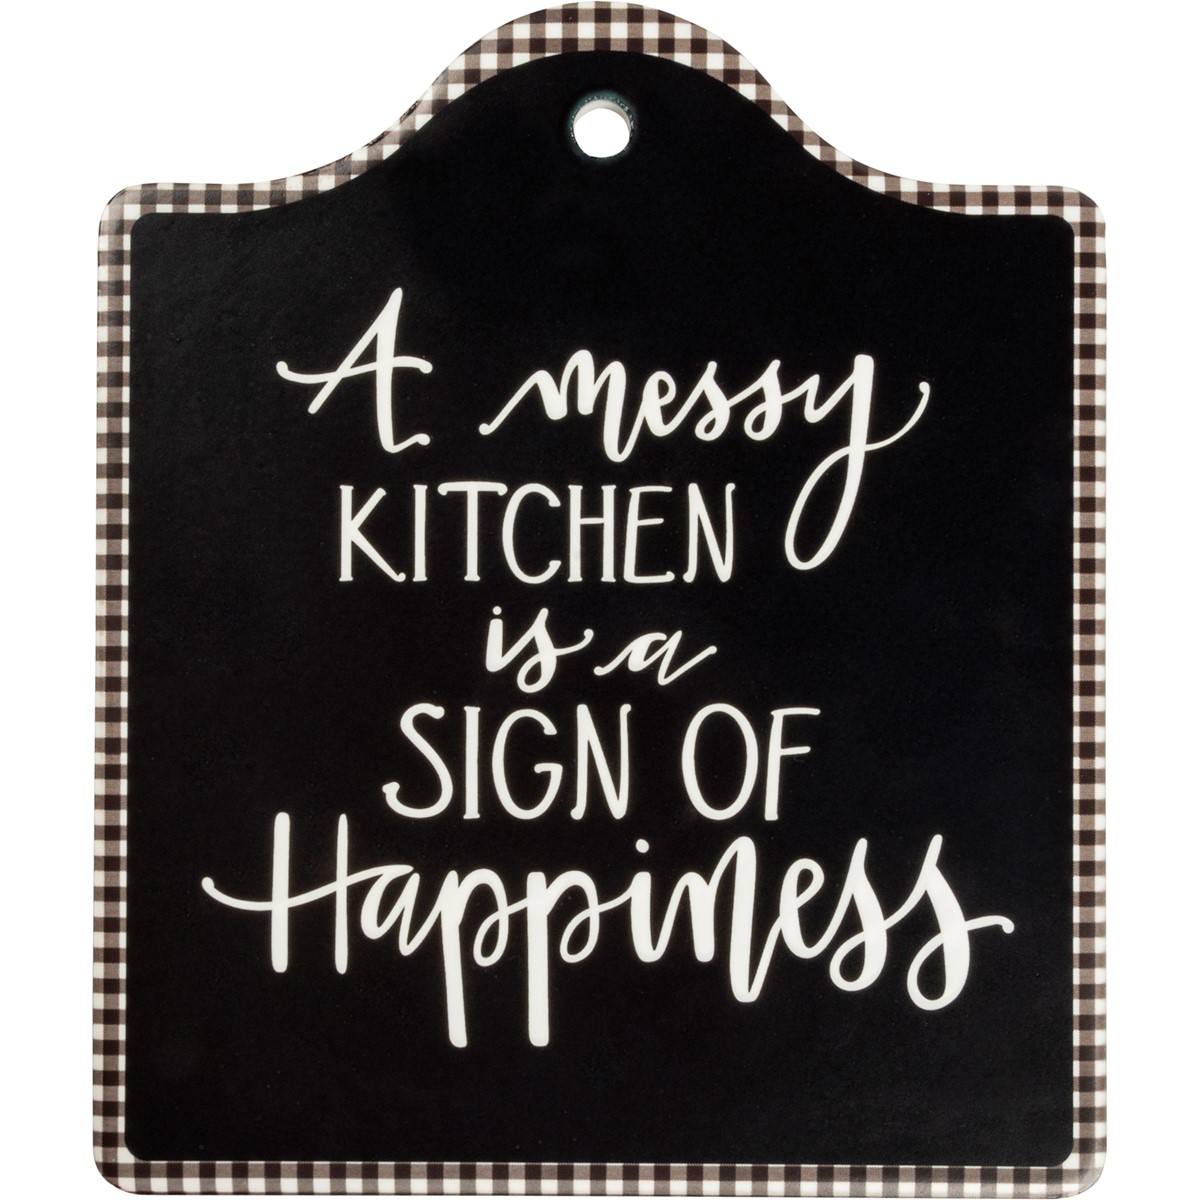 A Messy Kitchen Is A Sign Of Happiness Trivet - Stone